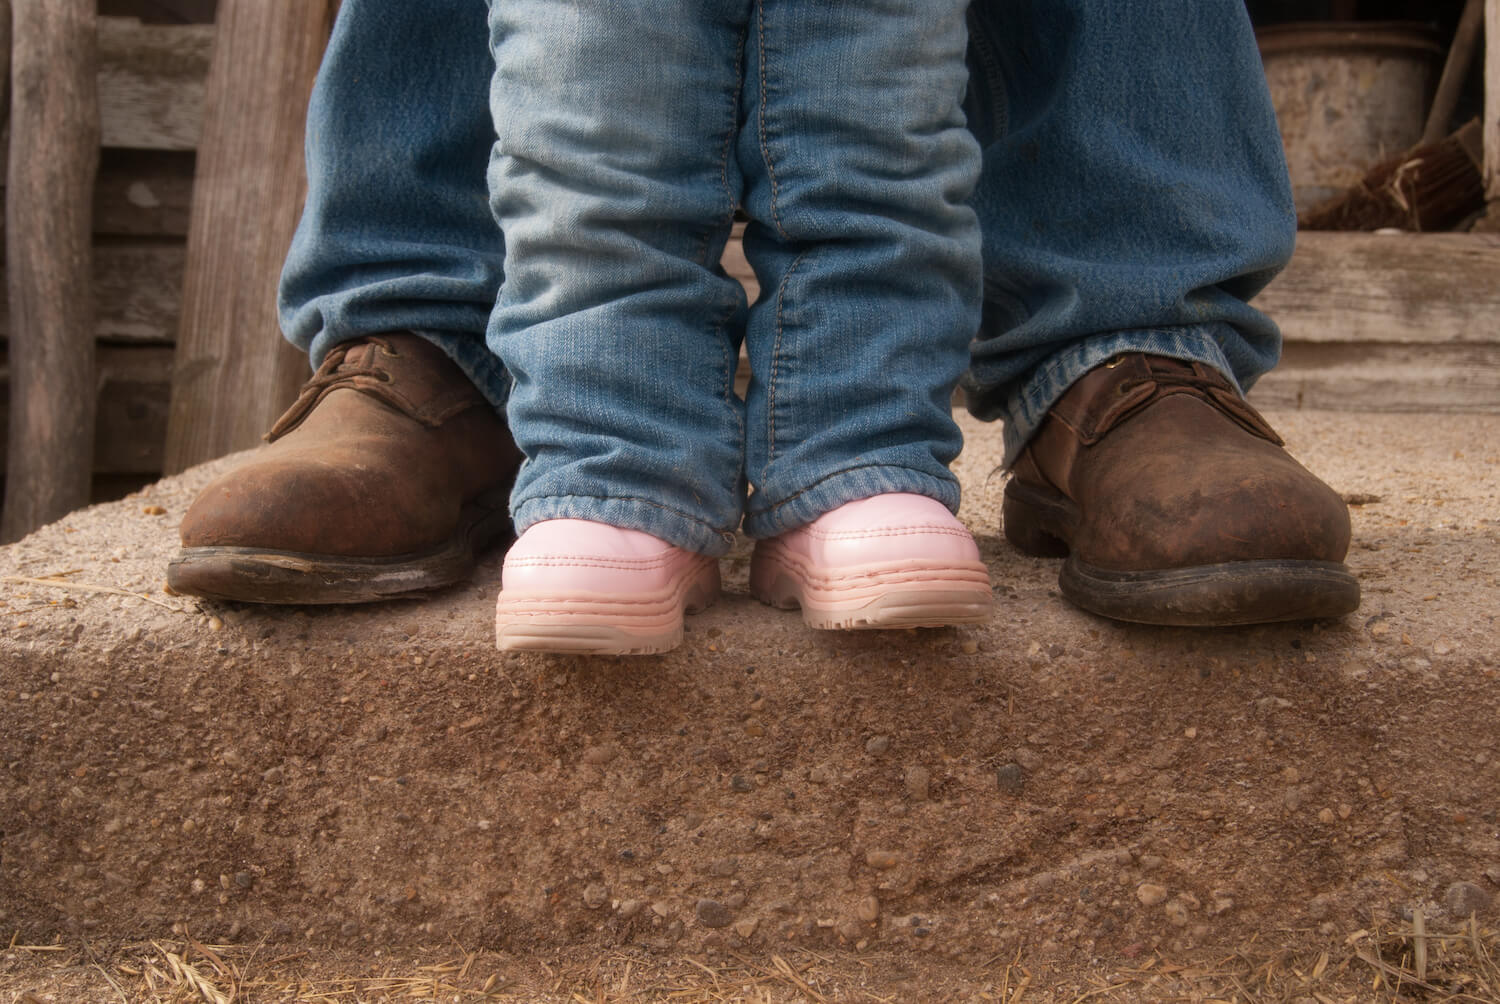 A pair of pink children's boots stands next to adult boots. November 2020